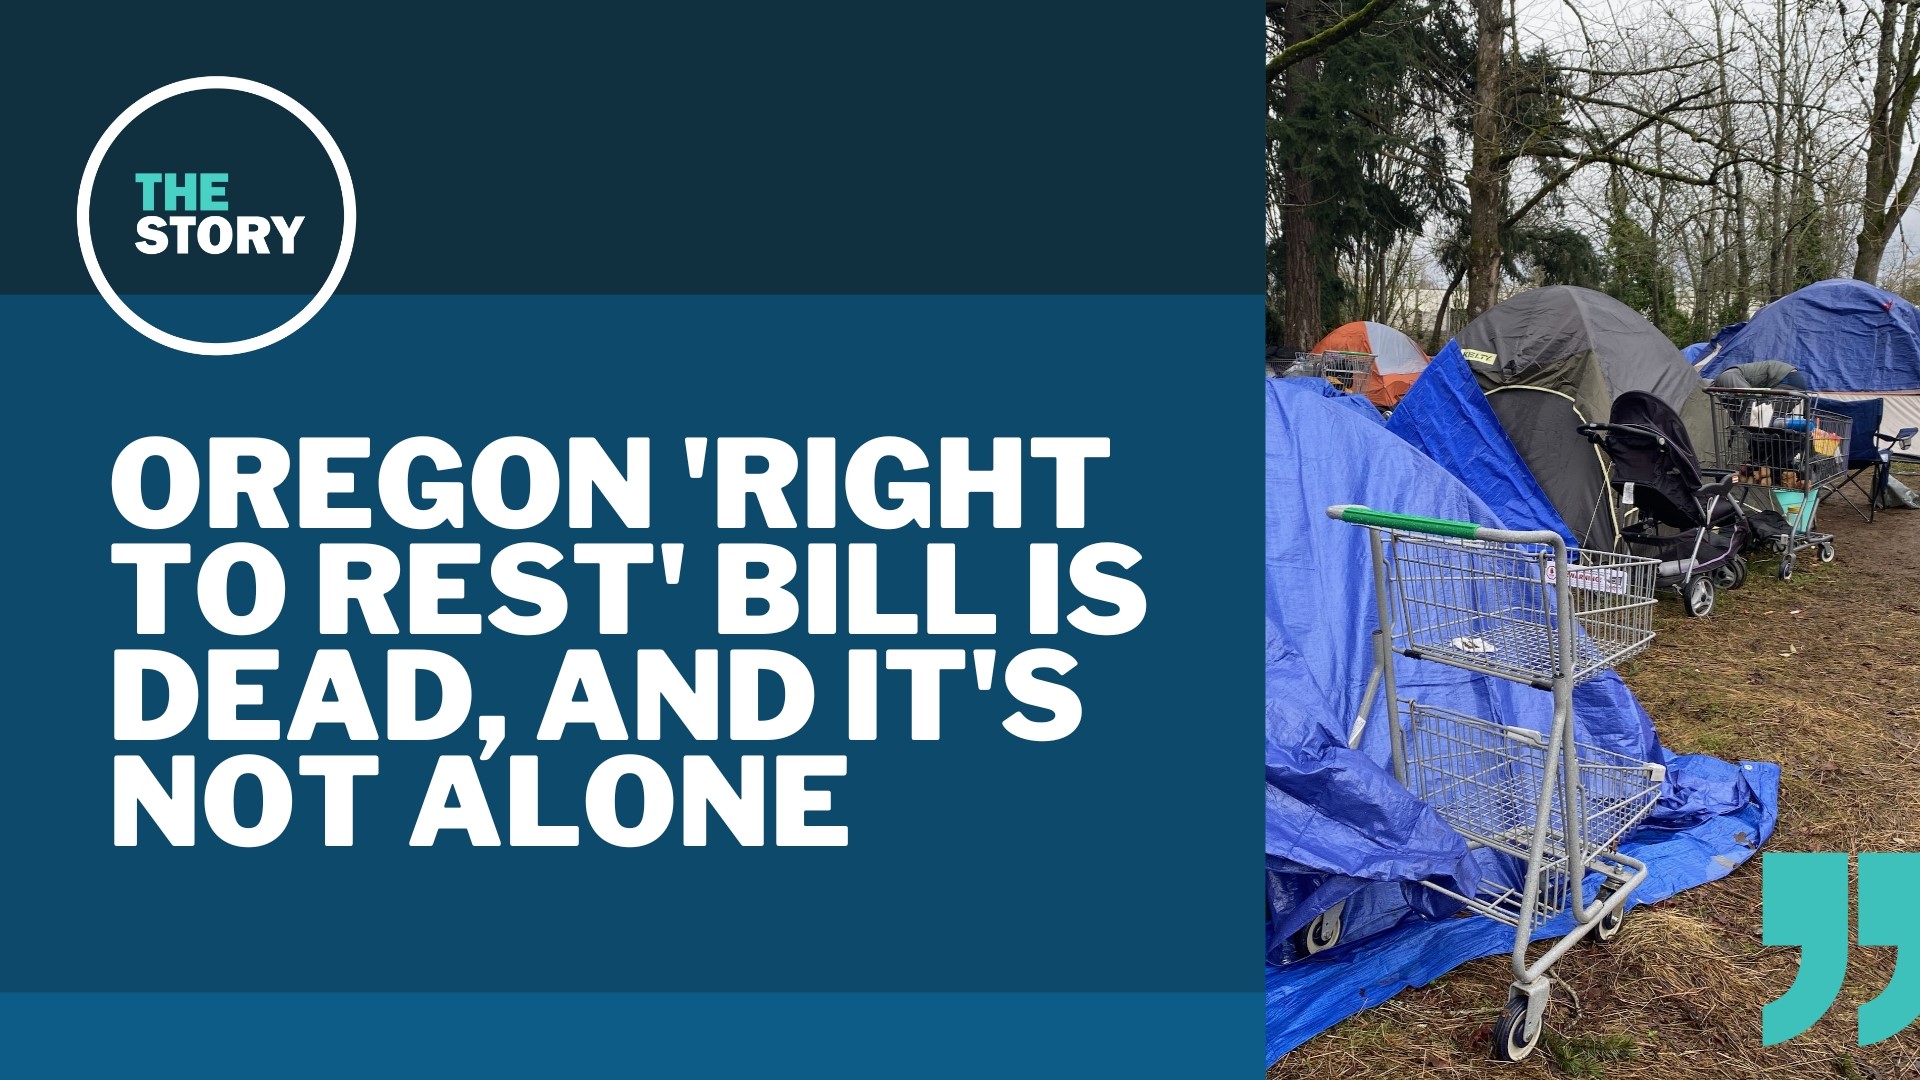 House Bill 3501, the “Right to Rest Act,” won’t even receive a public hearing as planned. It proposed banning sweeps of homeless camps but it stalled in Salem.